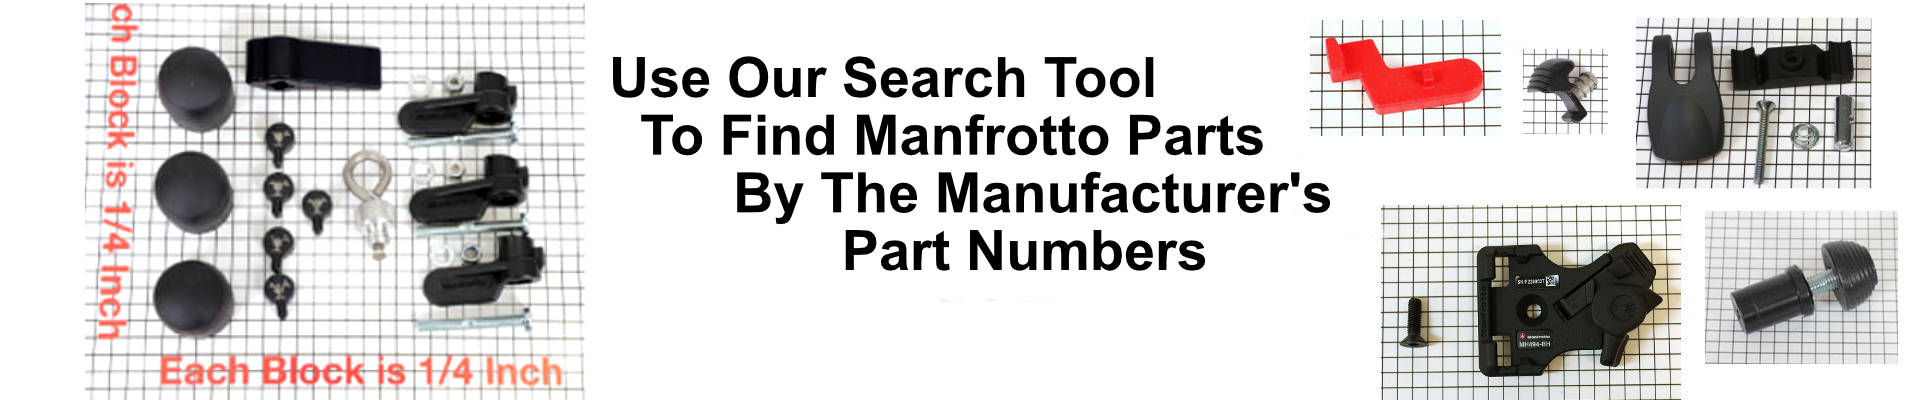 Search for Manfrotto Parts Lists